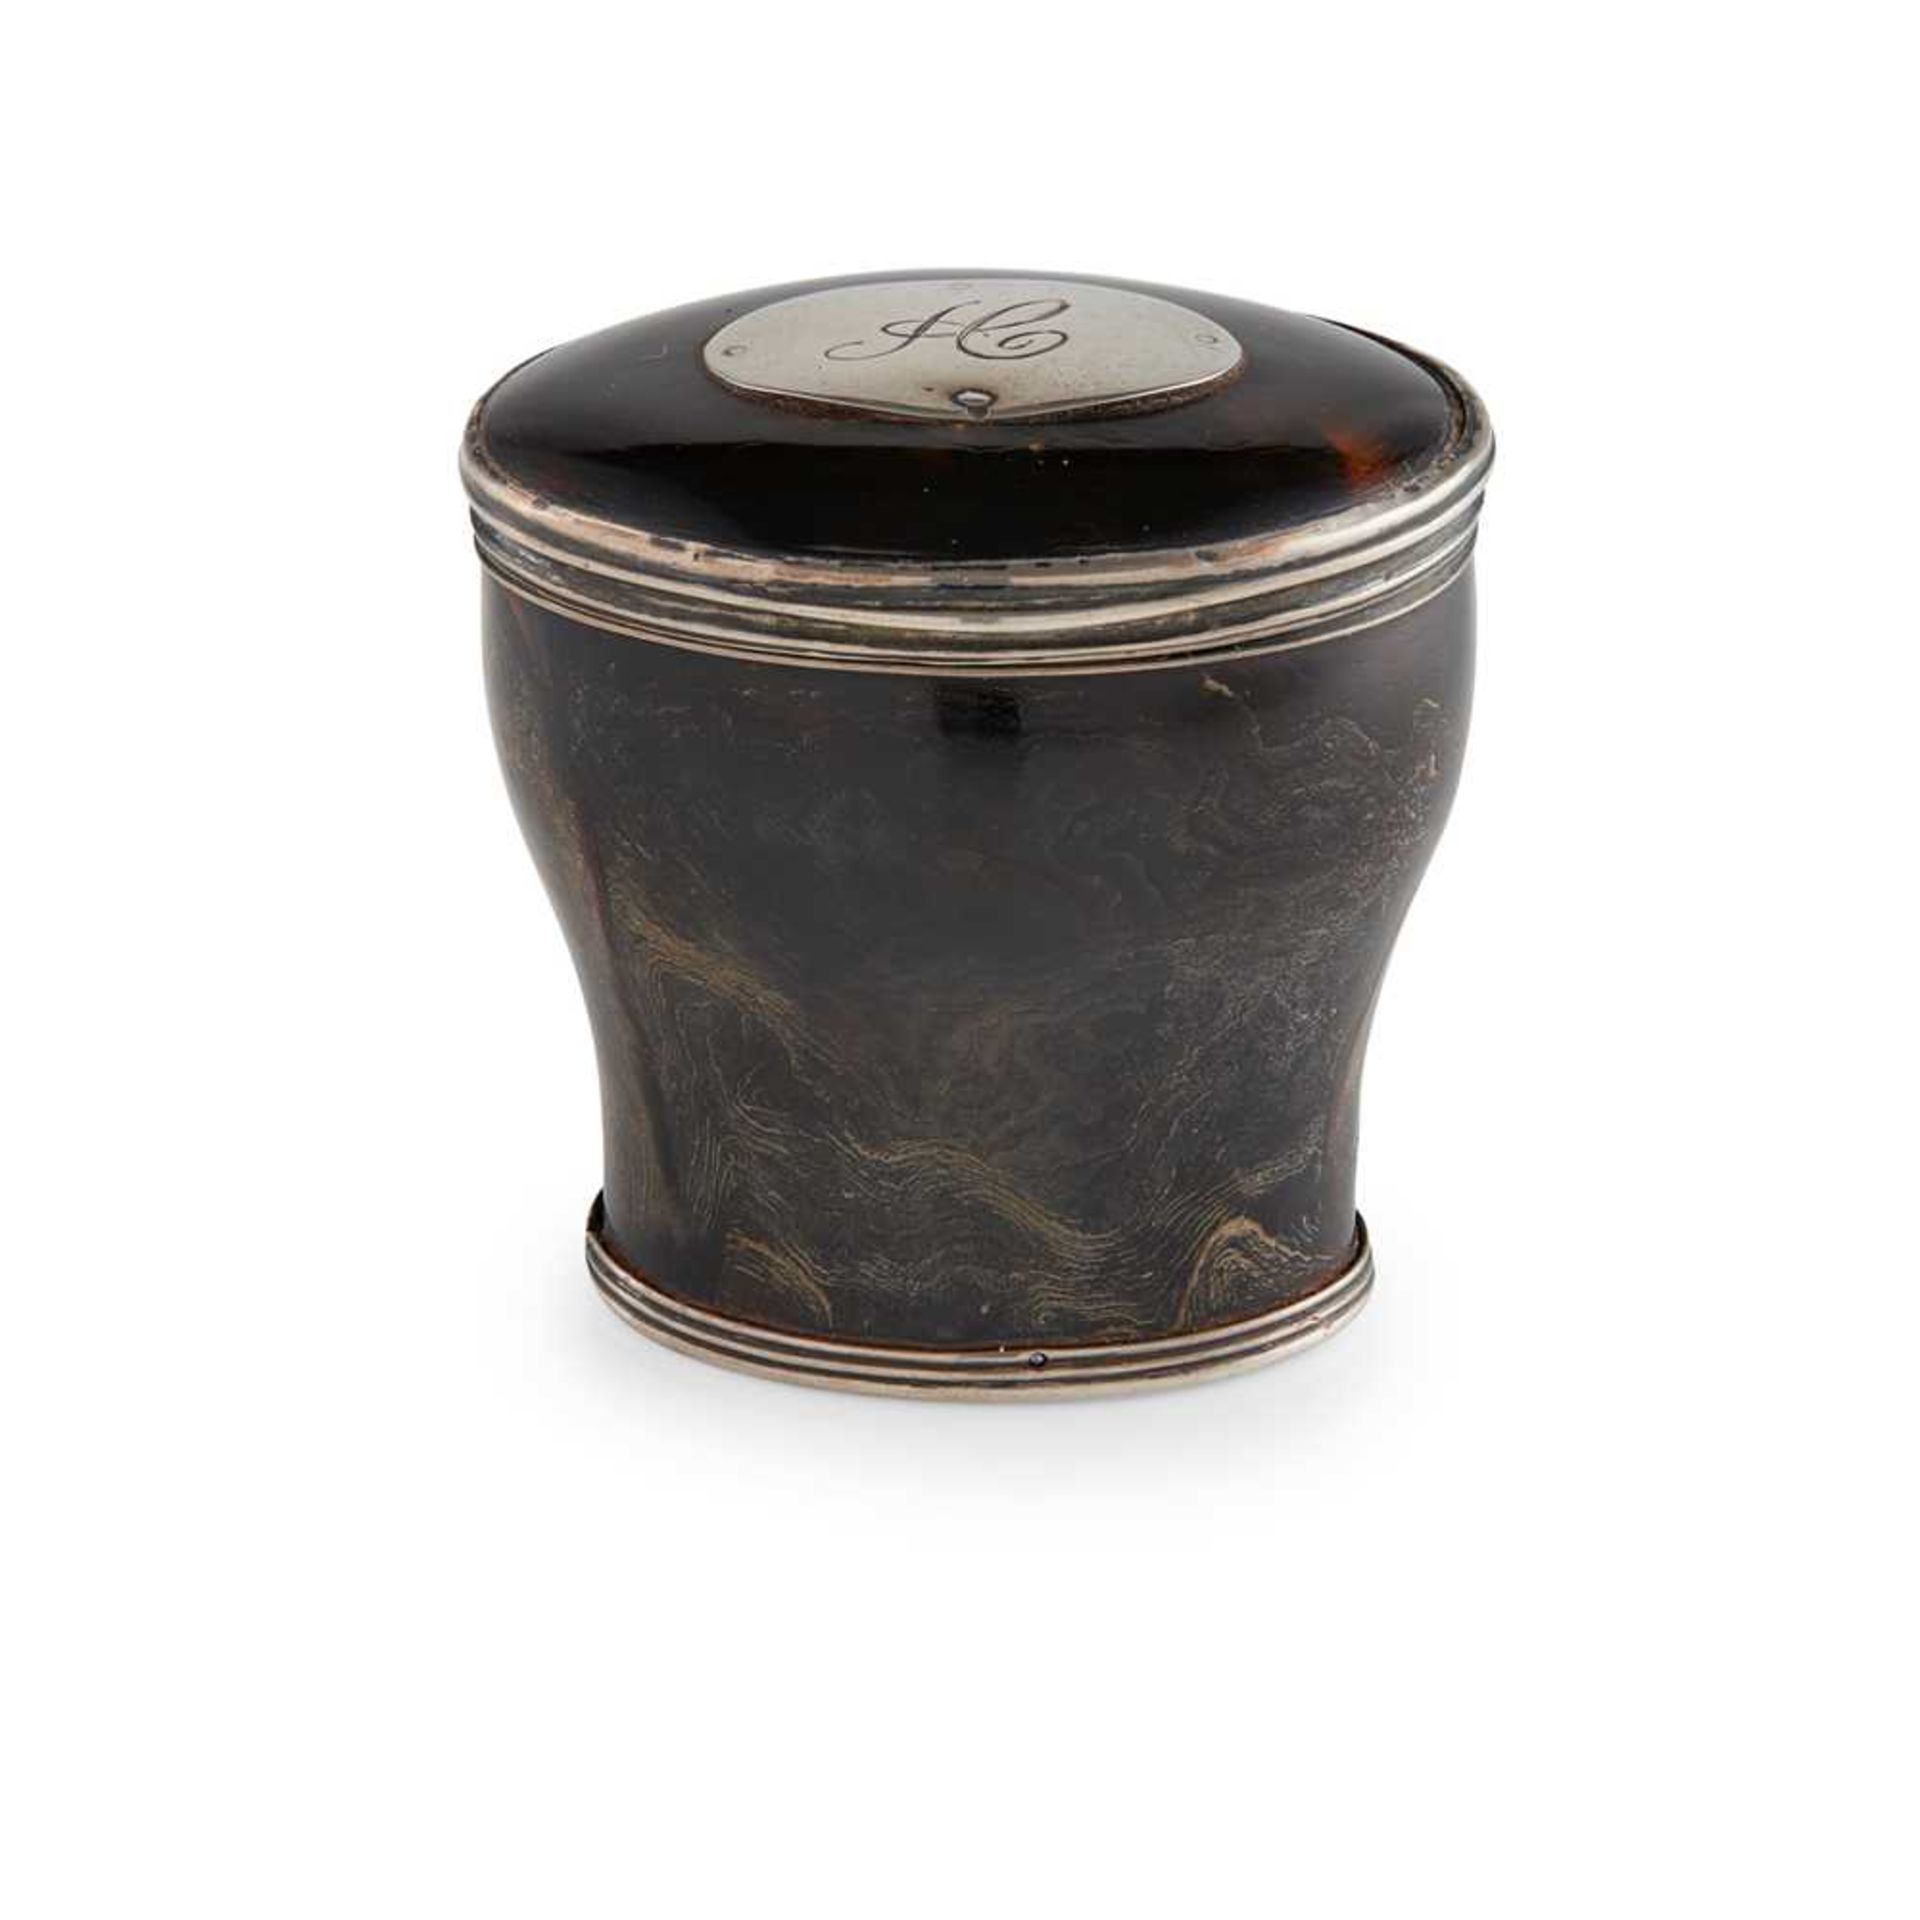 AN EARLY 18TH CENTURY TORTOISESHELL SNUFF MULL UNMARKED